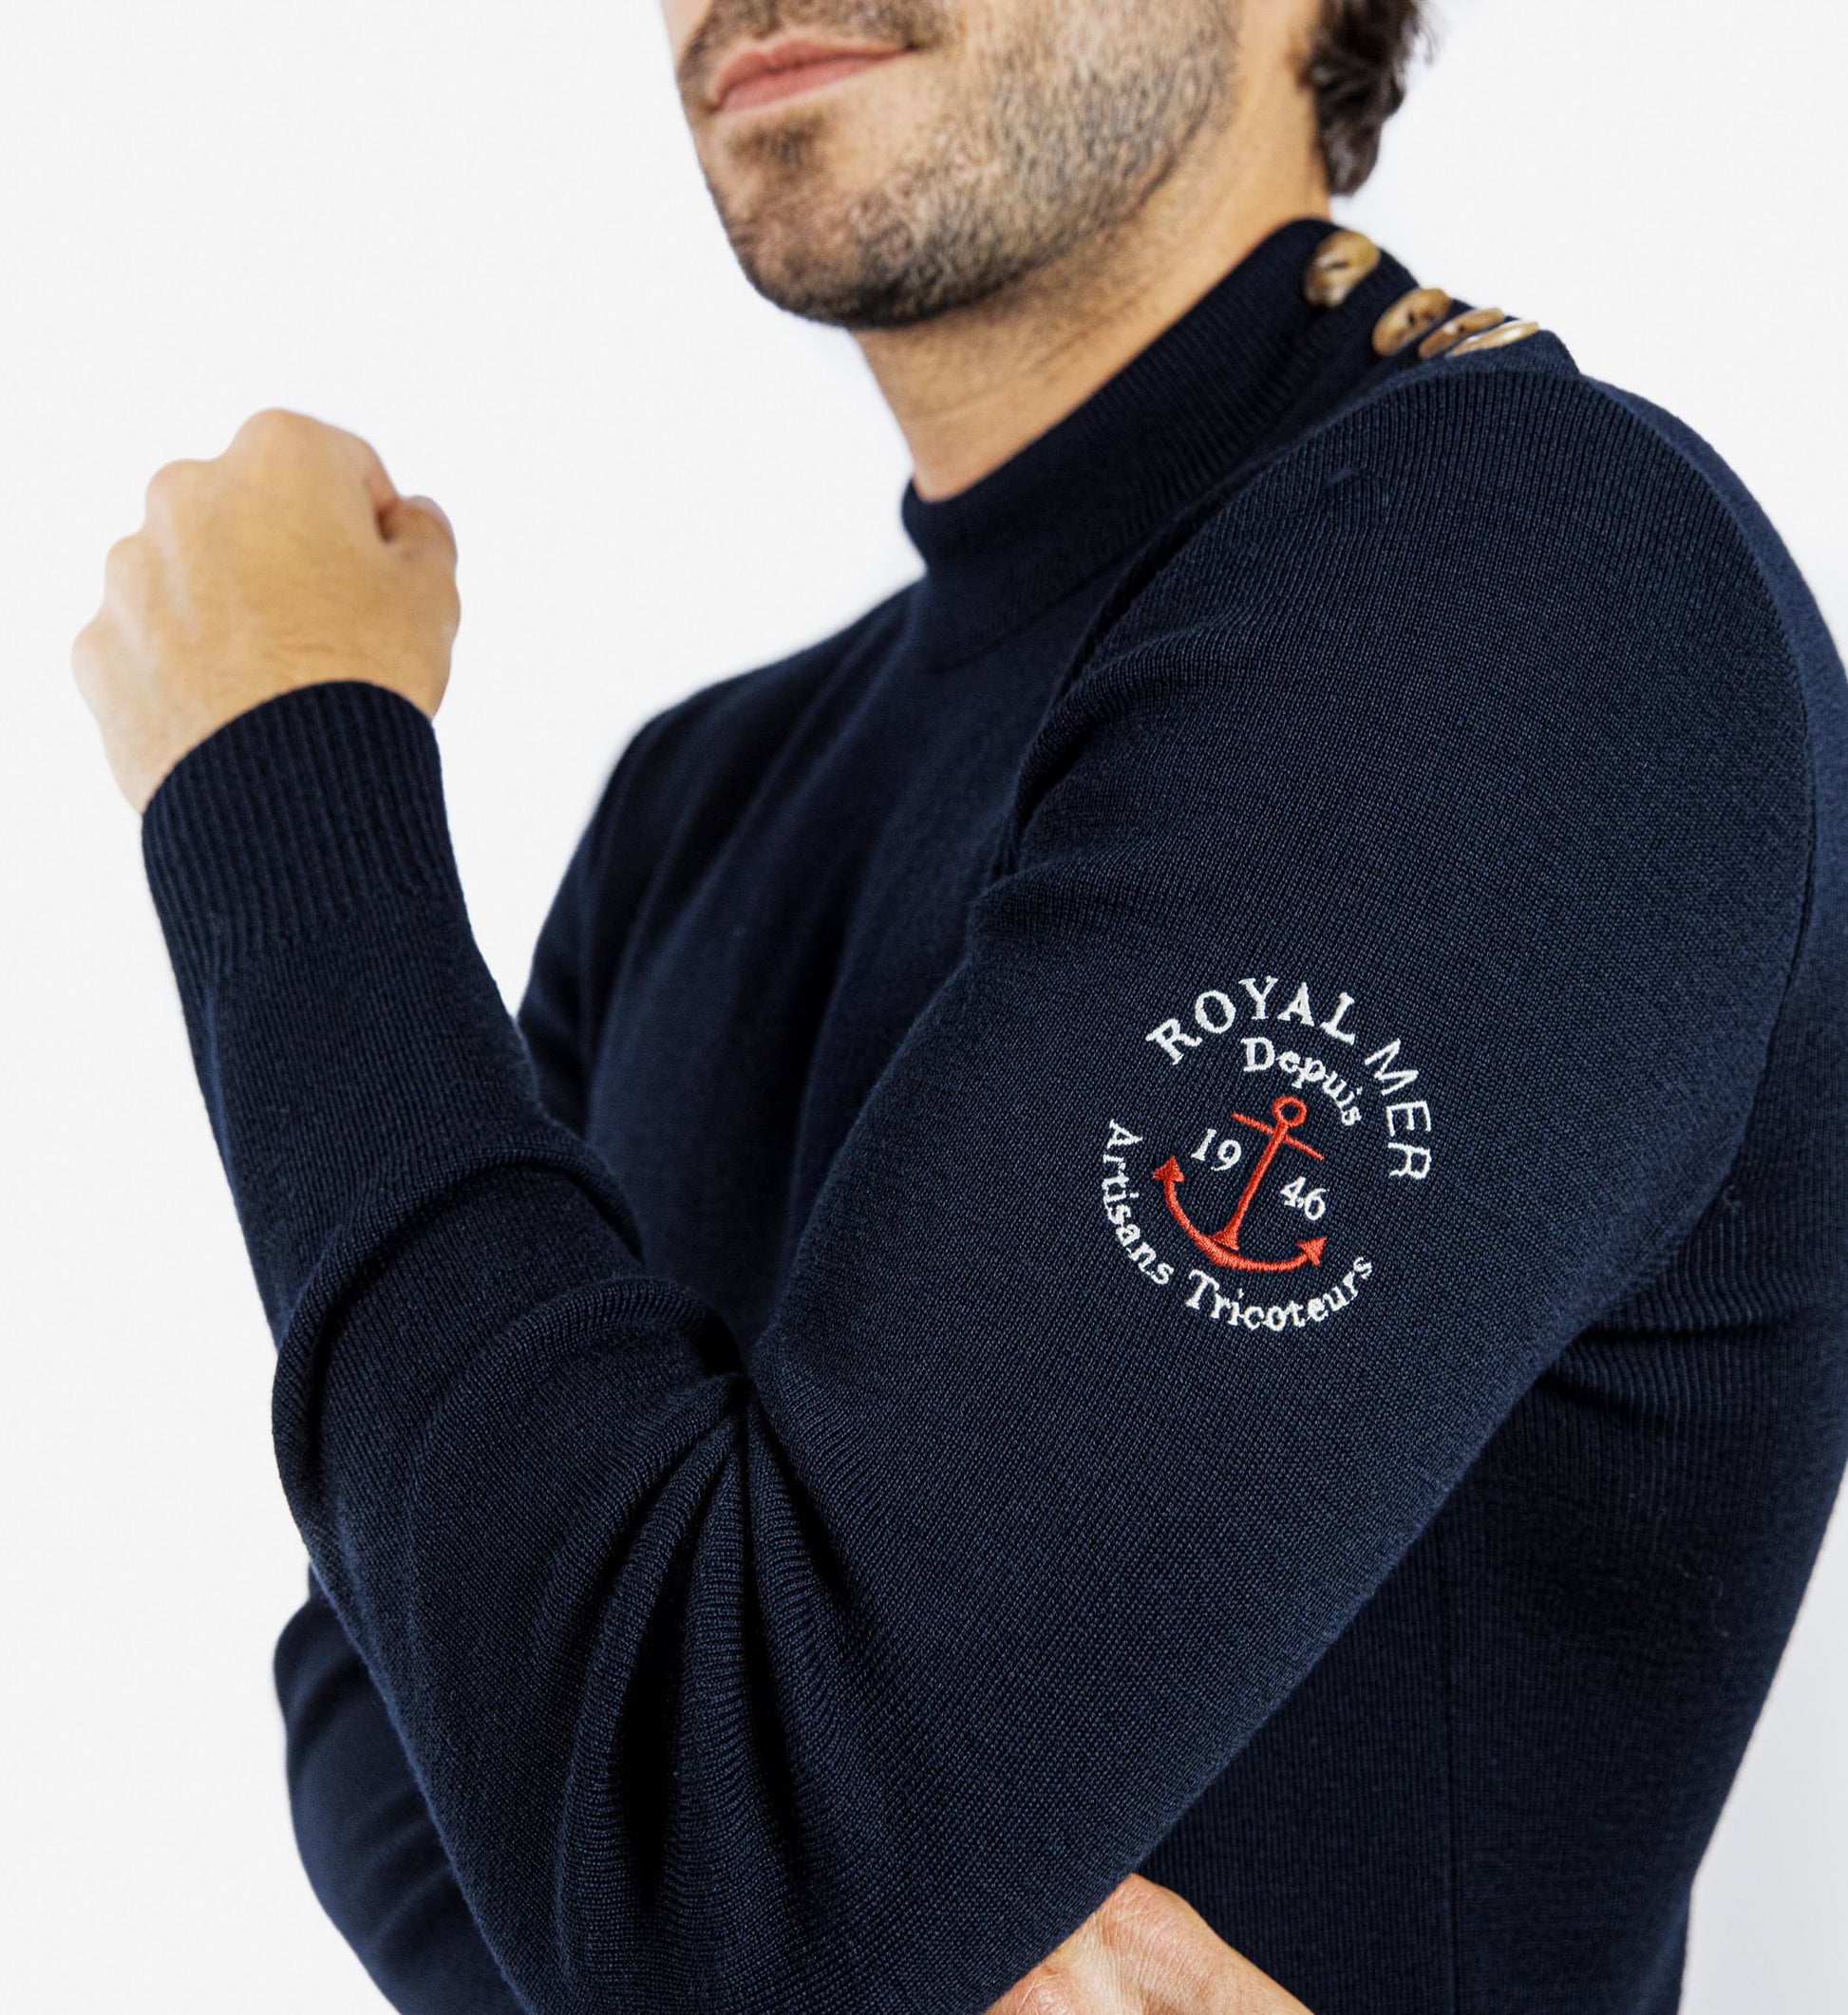 Sailor sweater with anchor embroidery